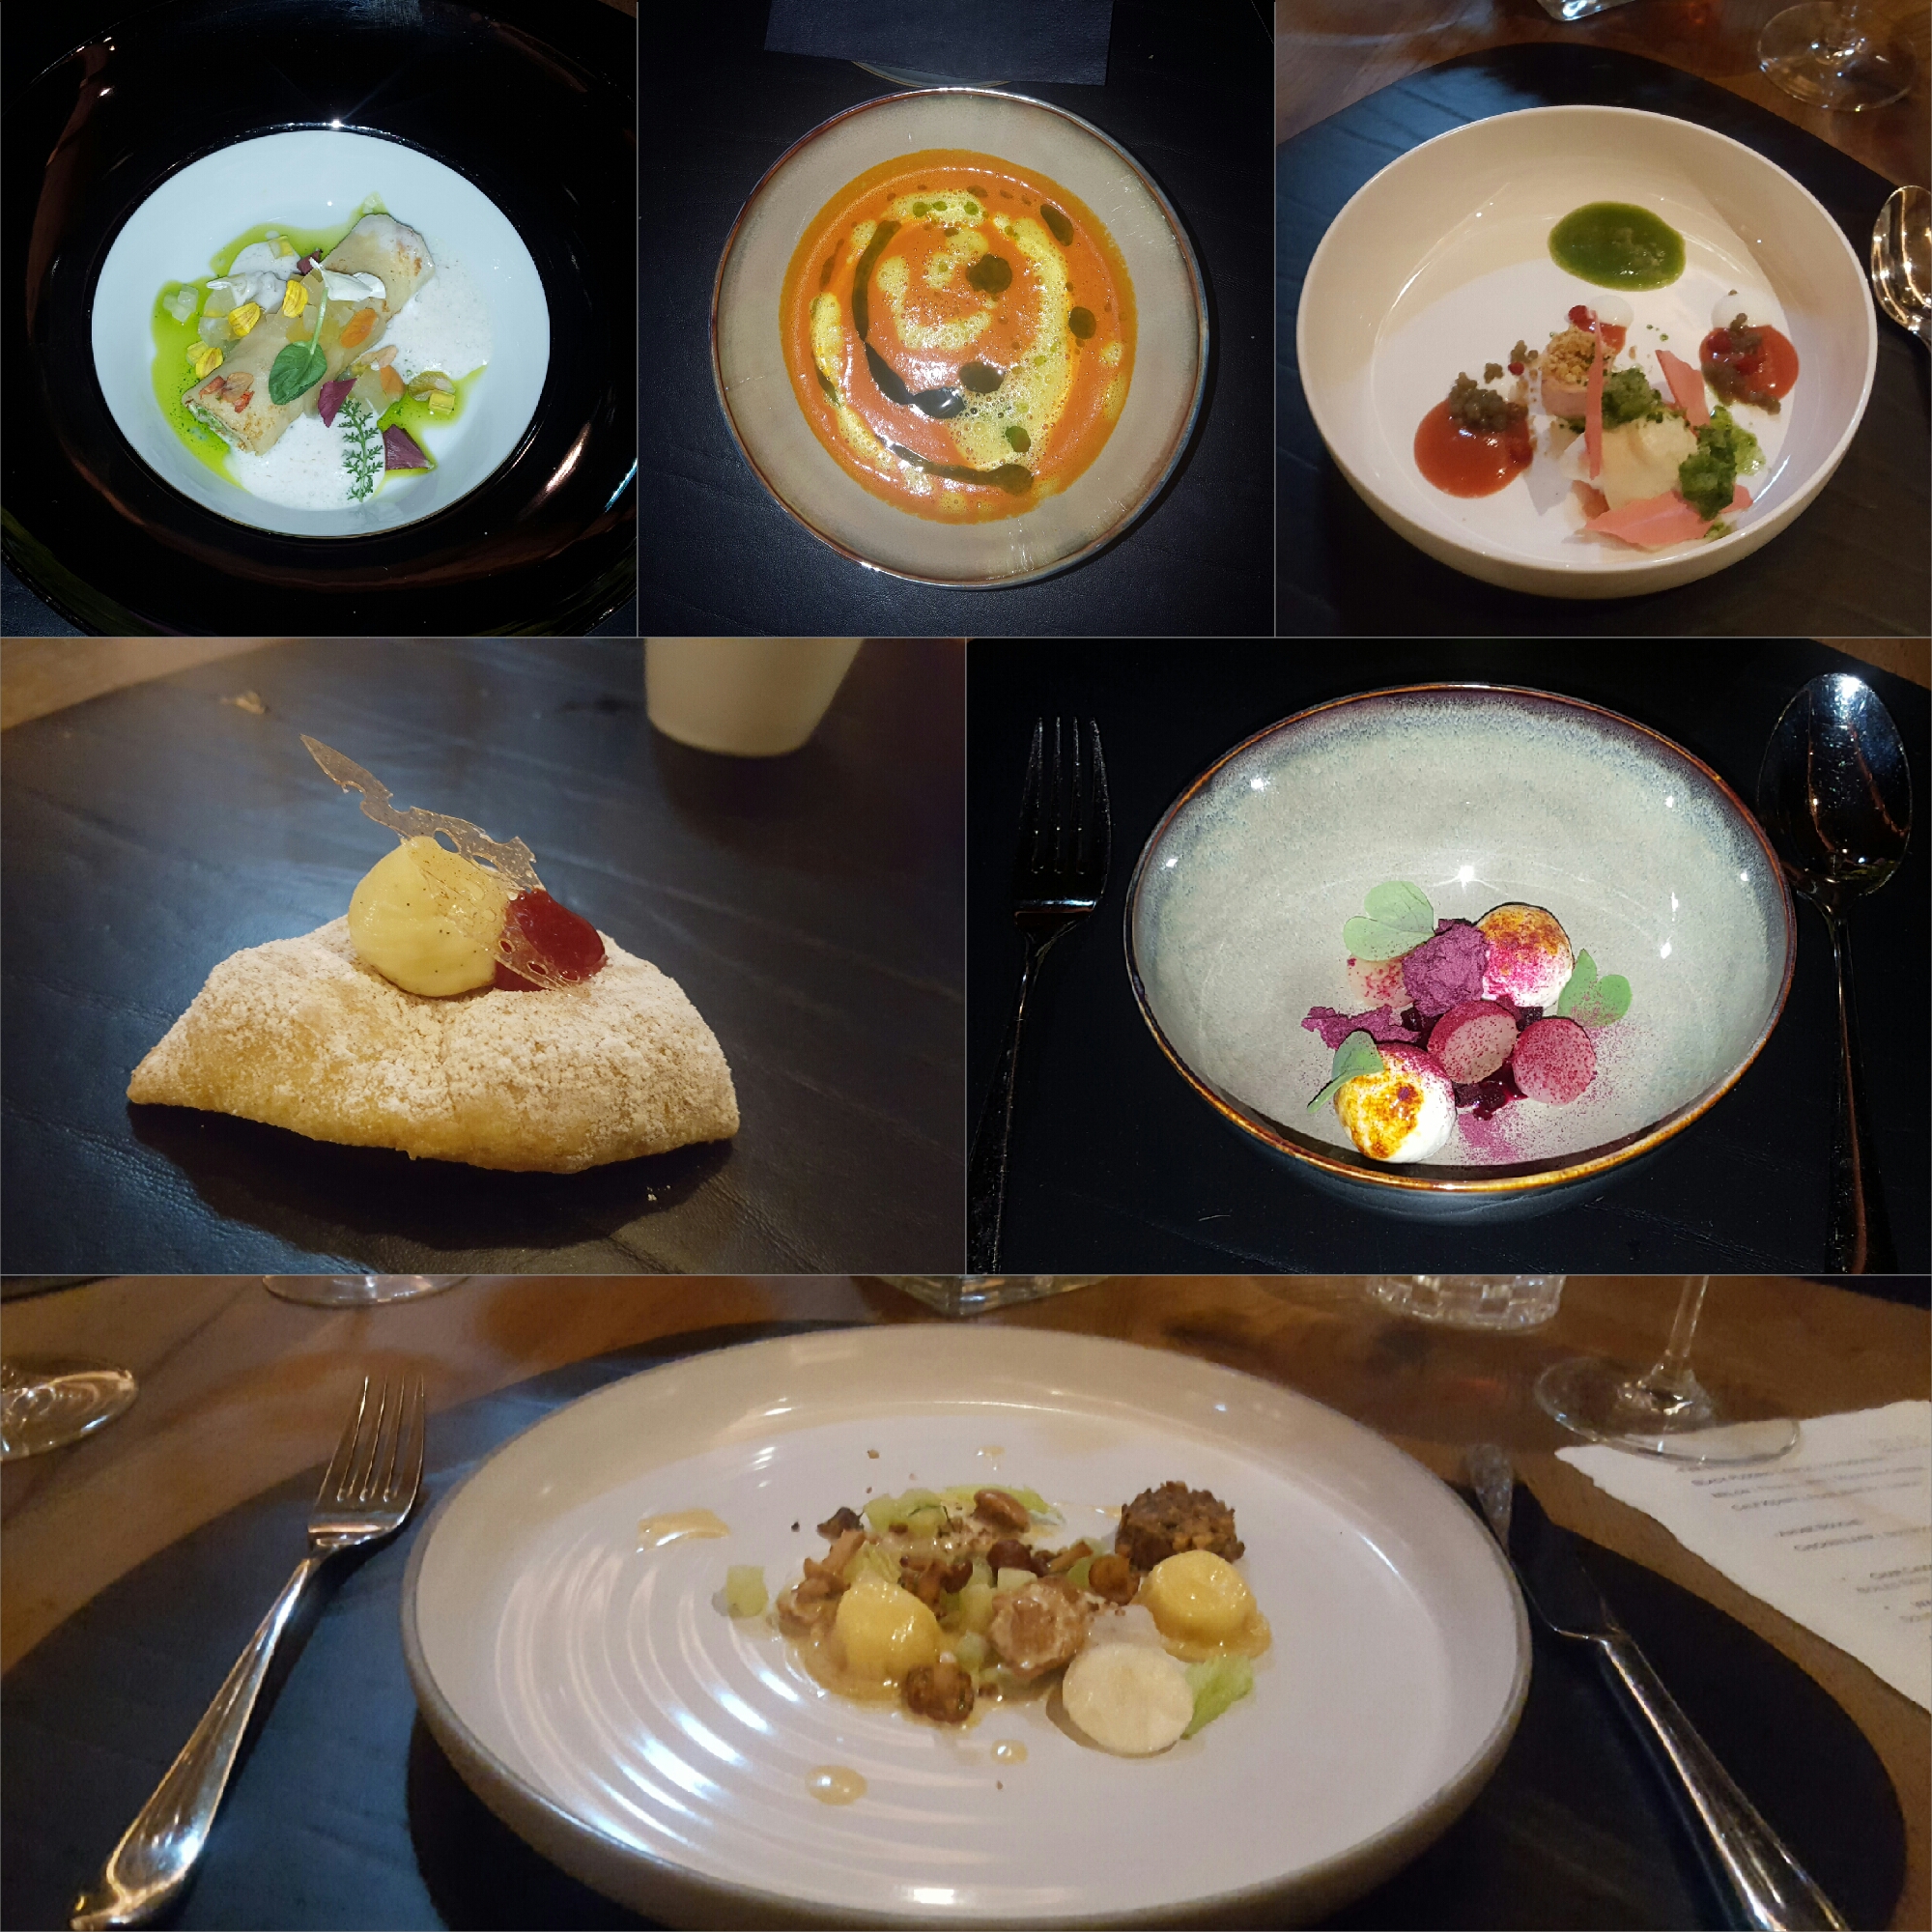 Just a few of my incredible veggie dishes...